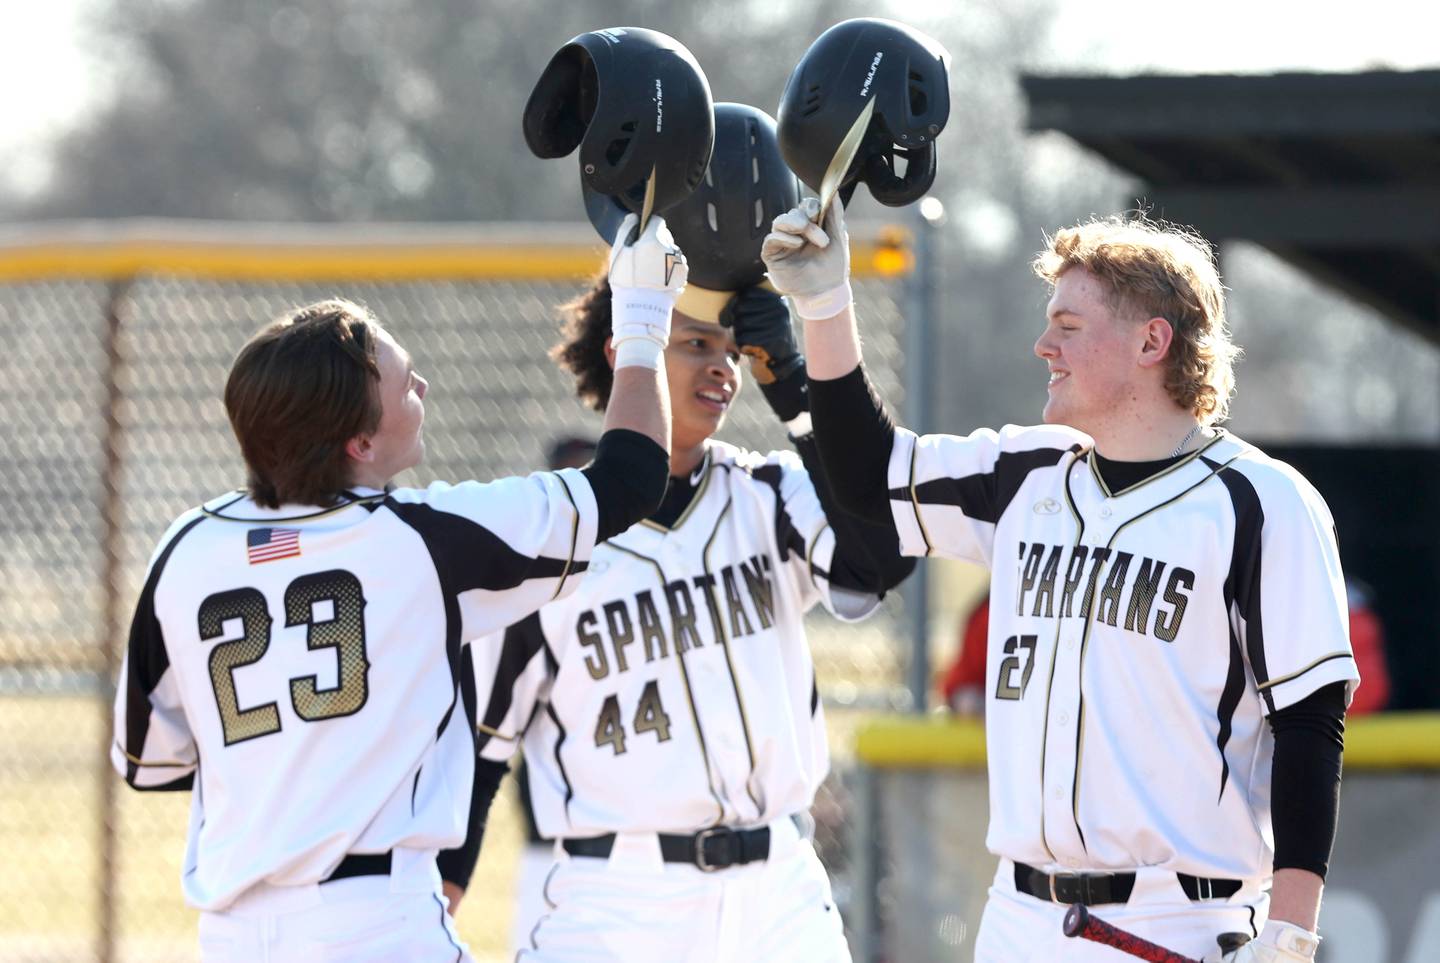 Sycamore's Kyle Hartmann (left) is greeted by Tommy Townsend and Jimmy Amptmann (right) as he crosses the plate after hitting his first of three home runs during their game against Harlem Monday, March 27, 2023, at the Sycamore Community Park.